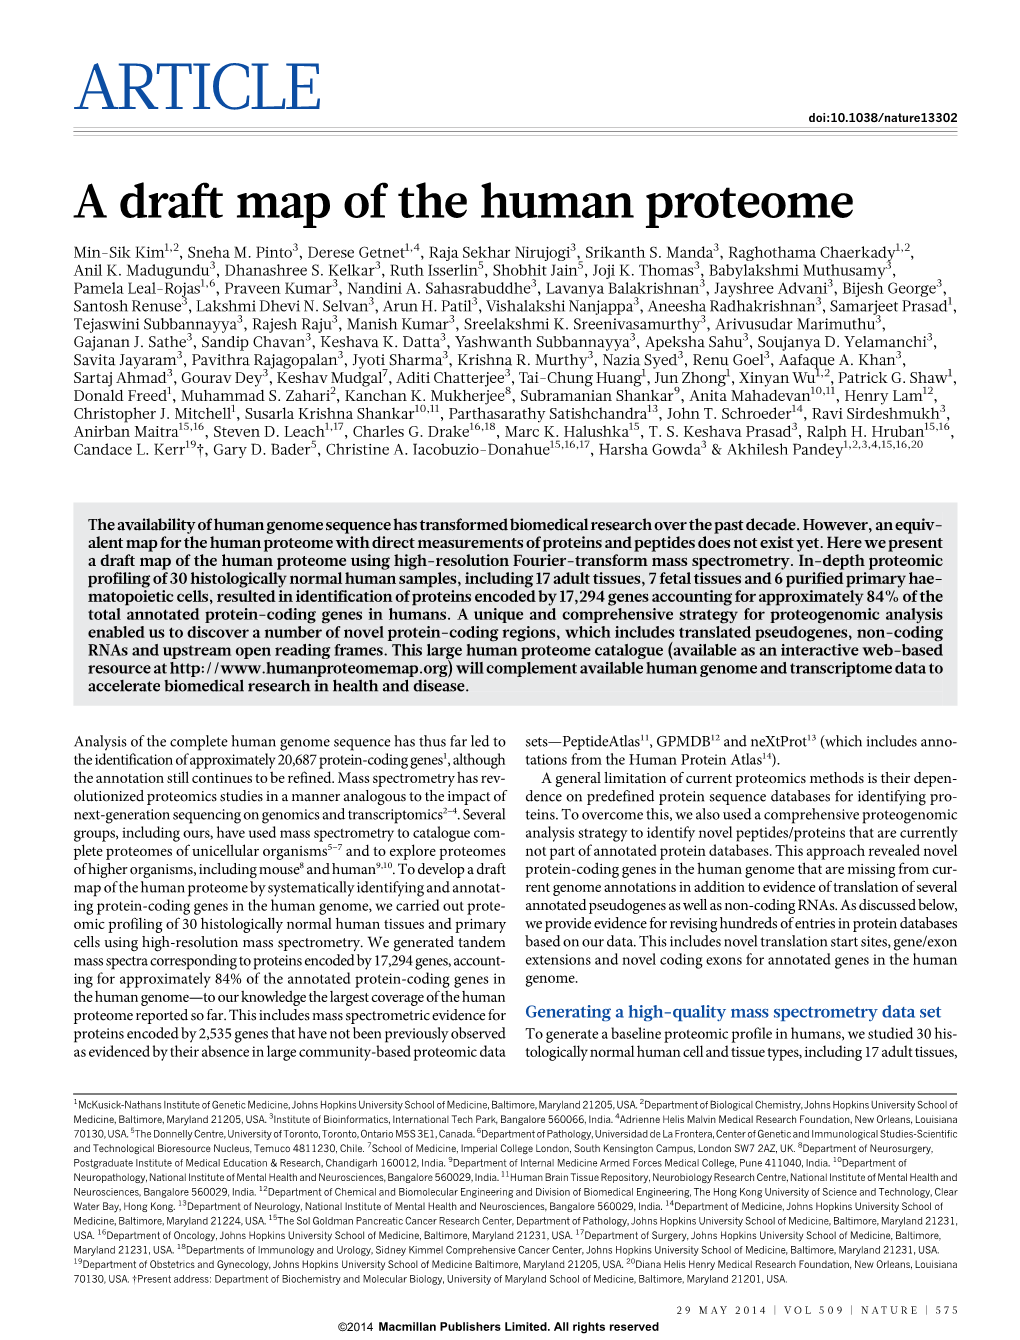 A Draft Map of the Human Proteome